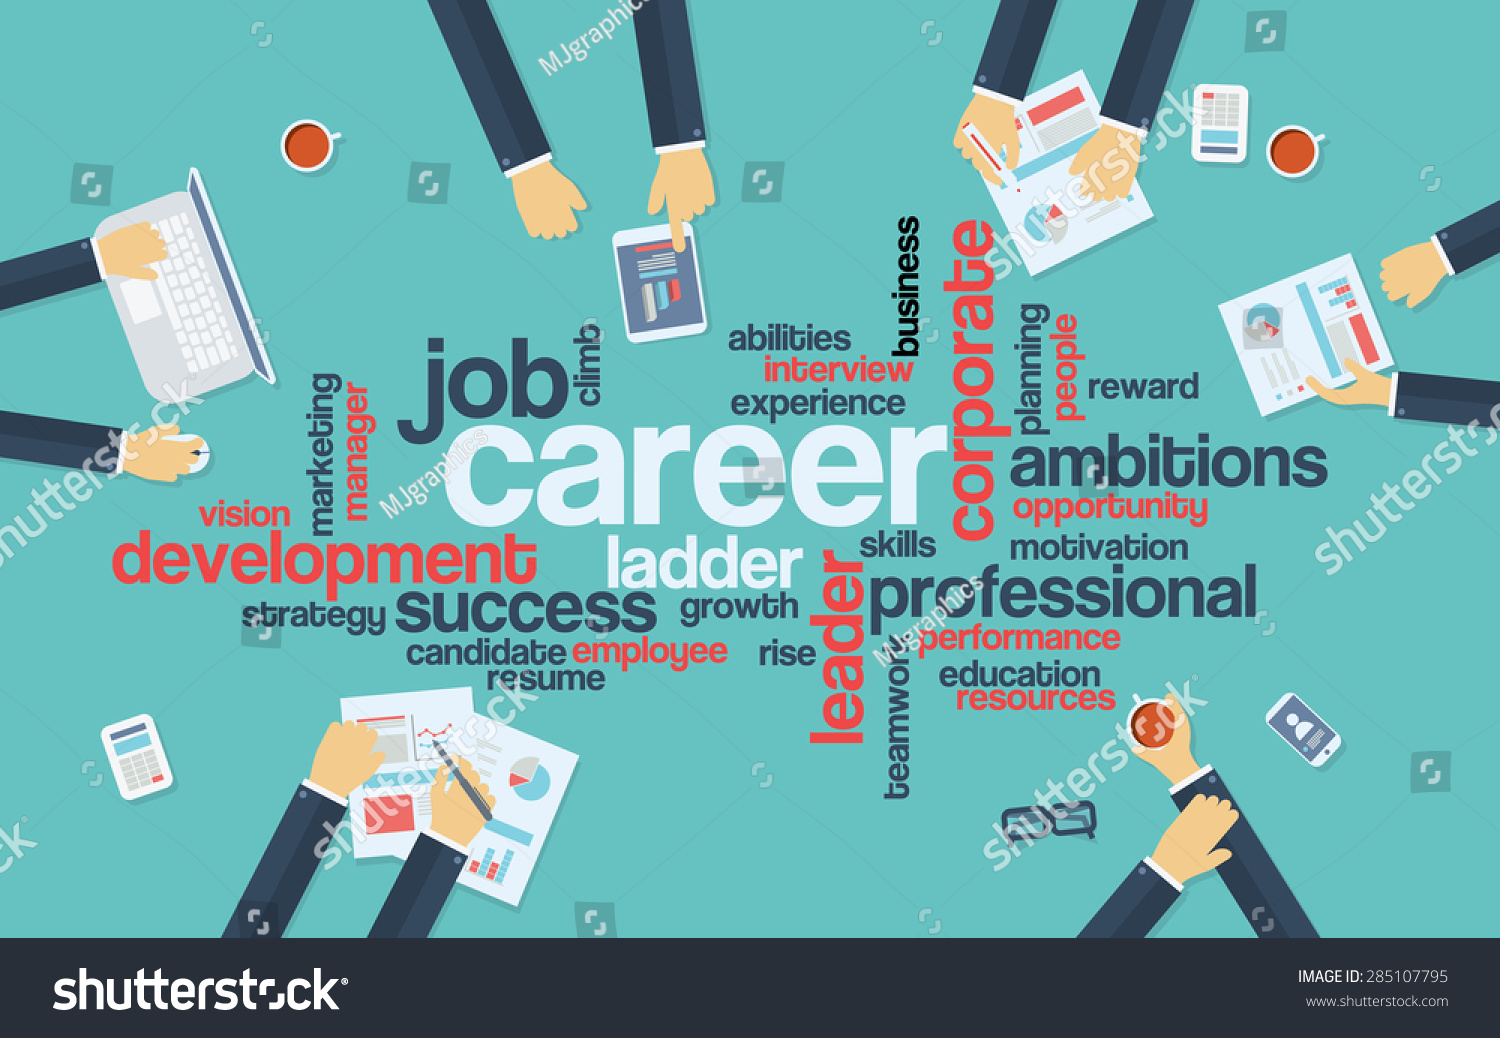 Introduction And Background Of Career Development